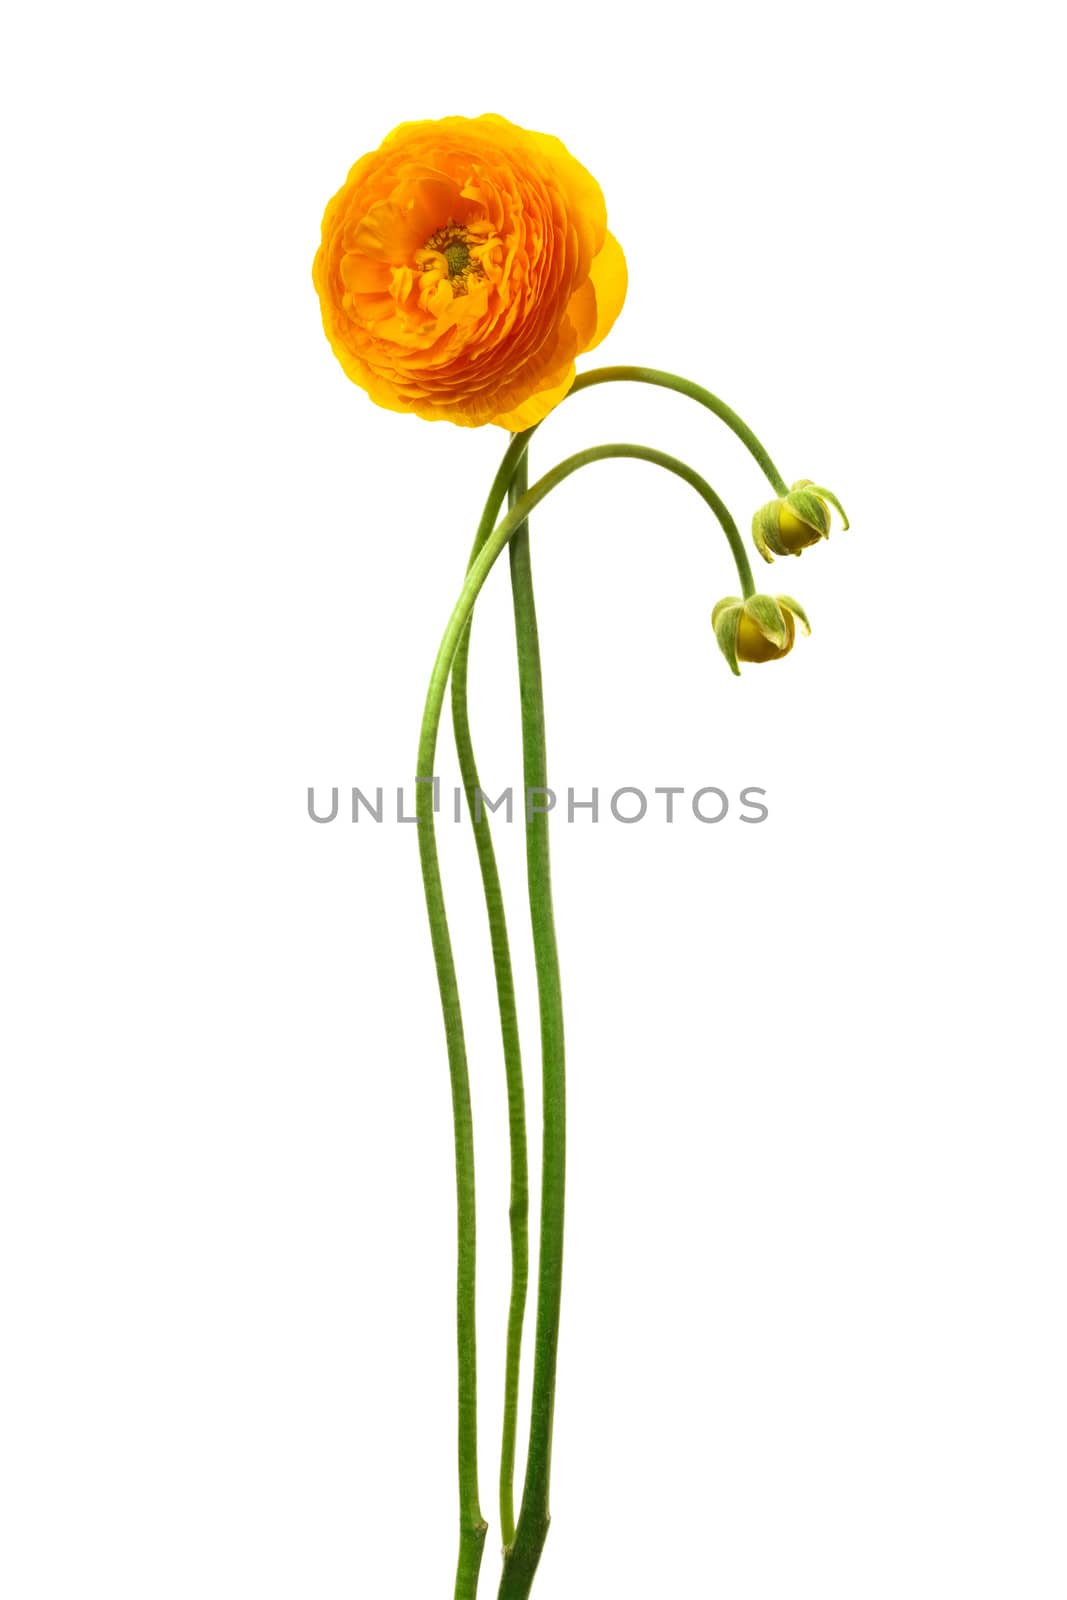 Beautiful yellow flower on a white background